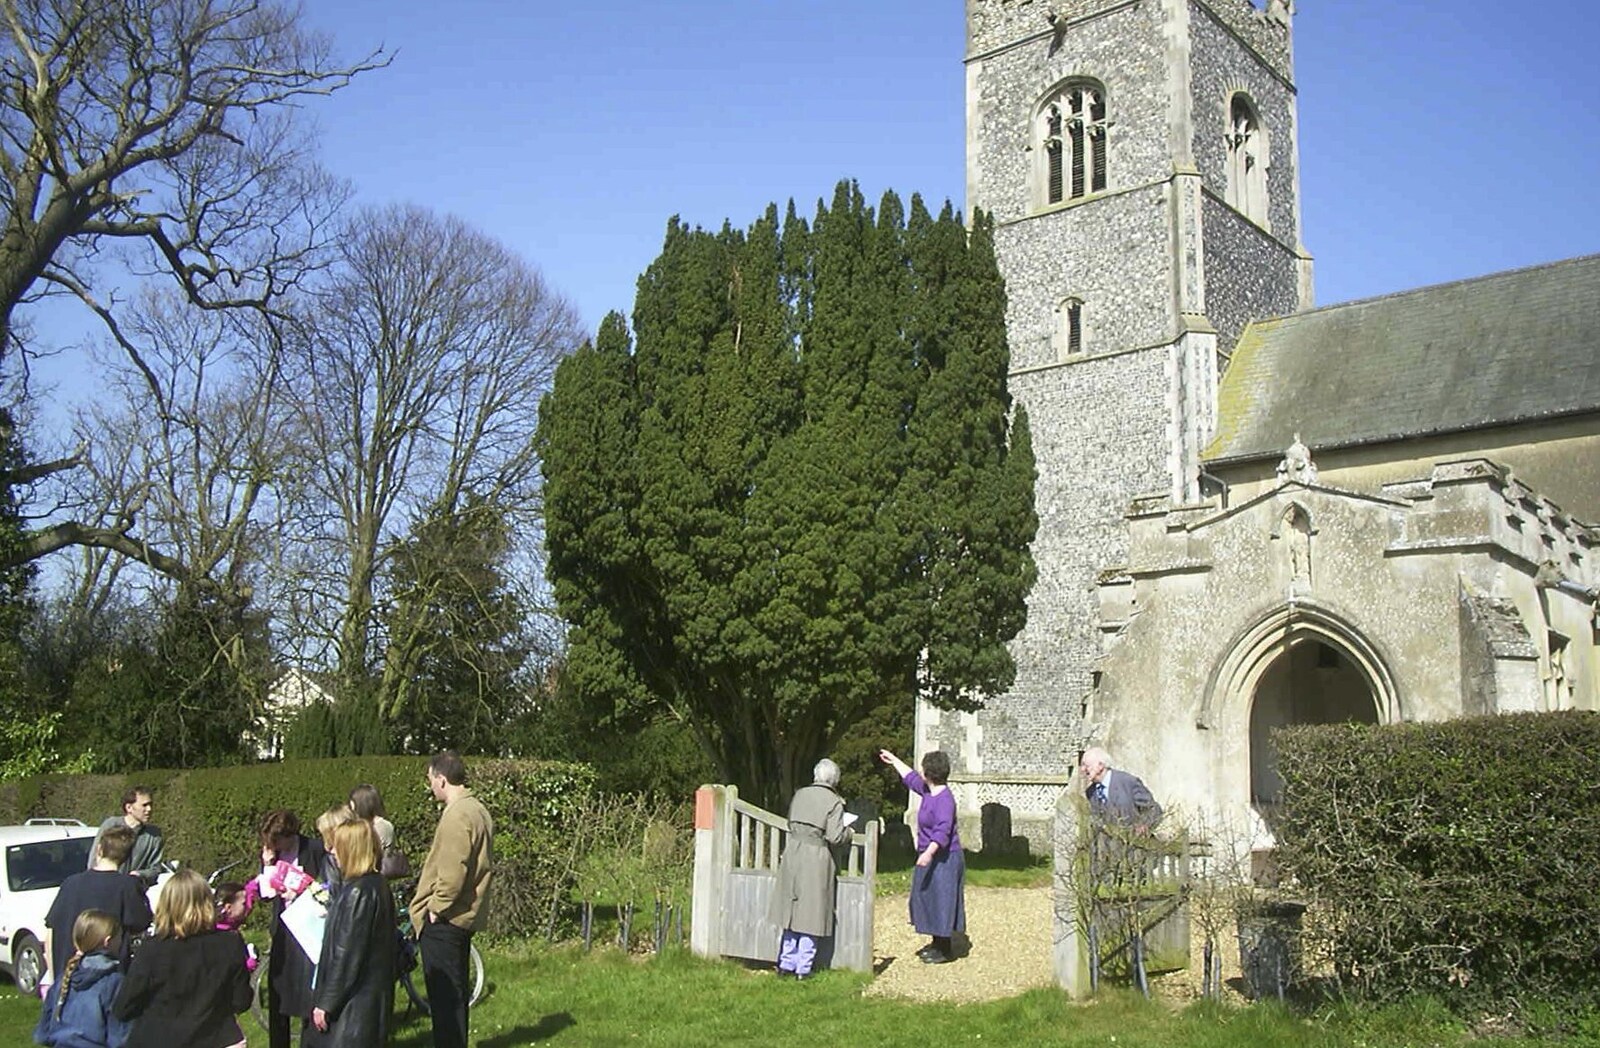 There's something going on at Thrandeston church from Suey's Actual Birthday, Thorndon, Suffolk - 2nd April 2002